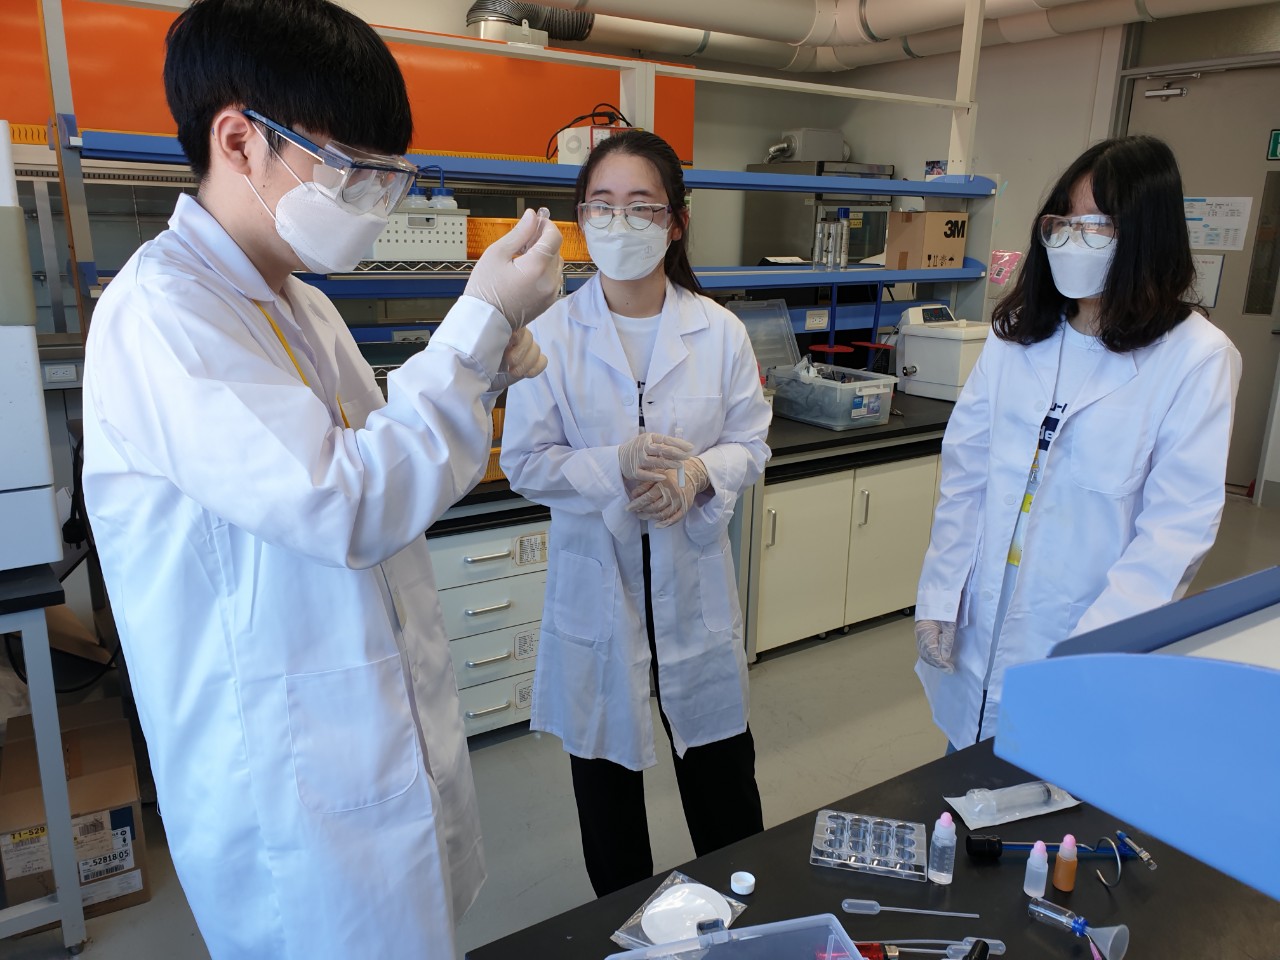 Students developed their interests in science and engineering and its related studies and careers through various expriments. | Photo: UNIST Leadership Center